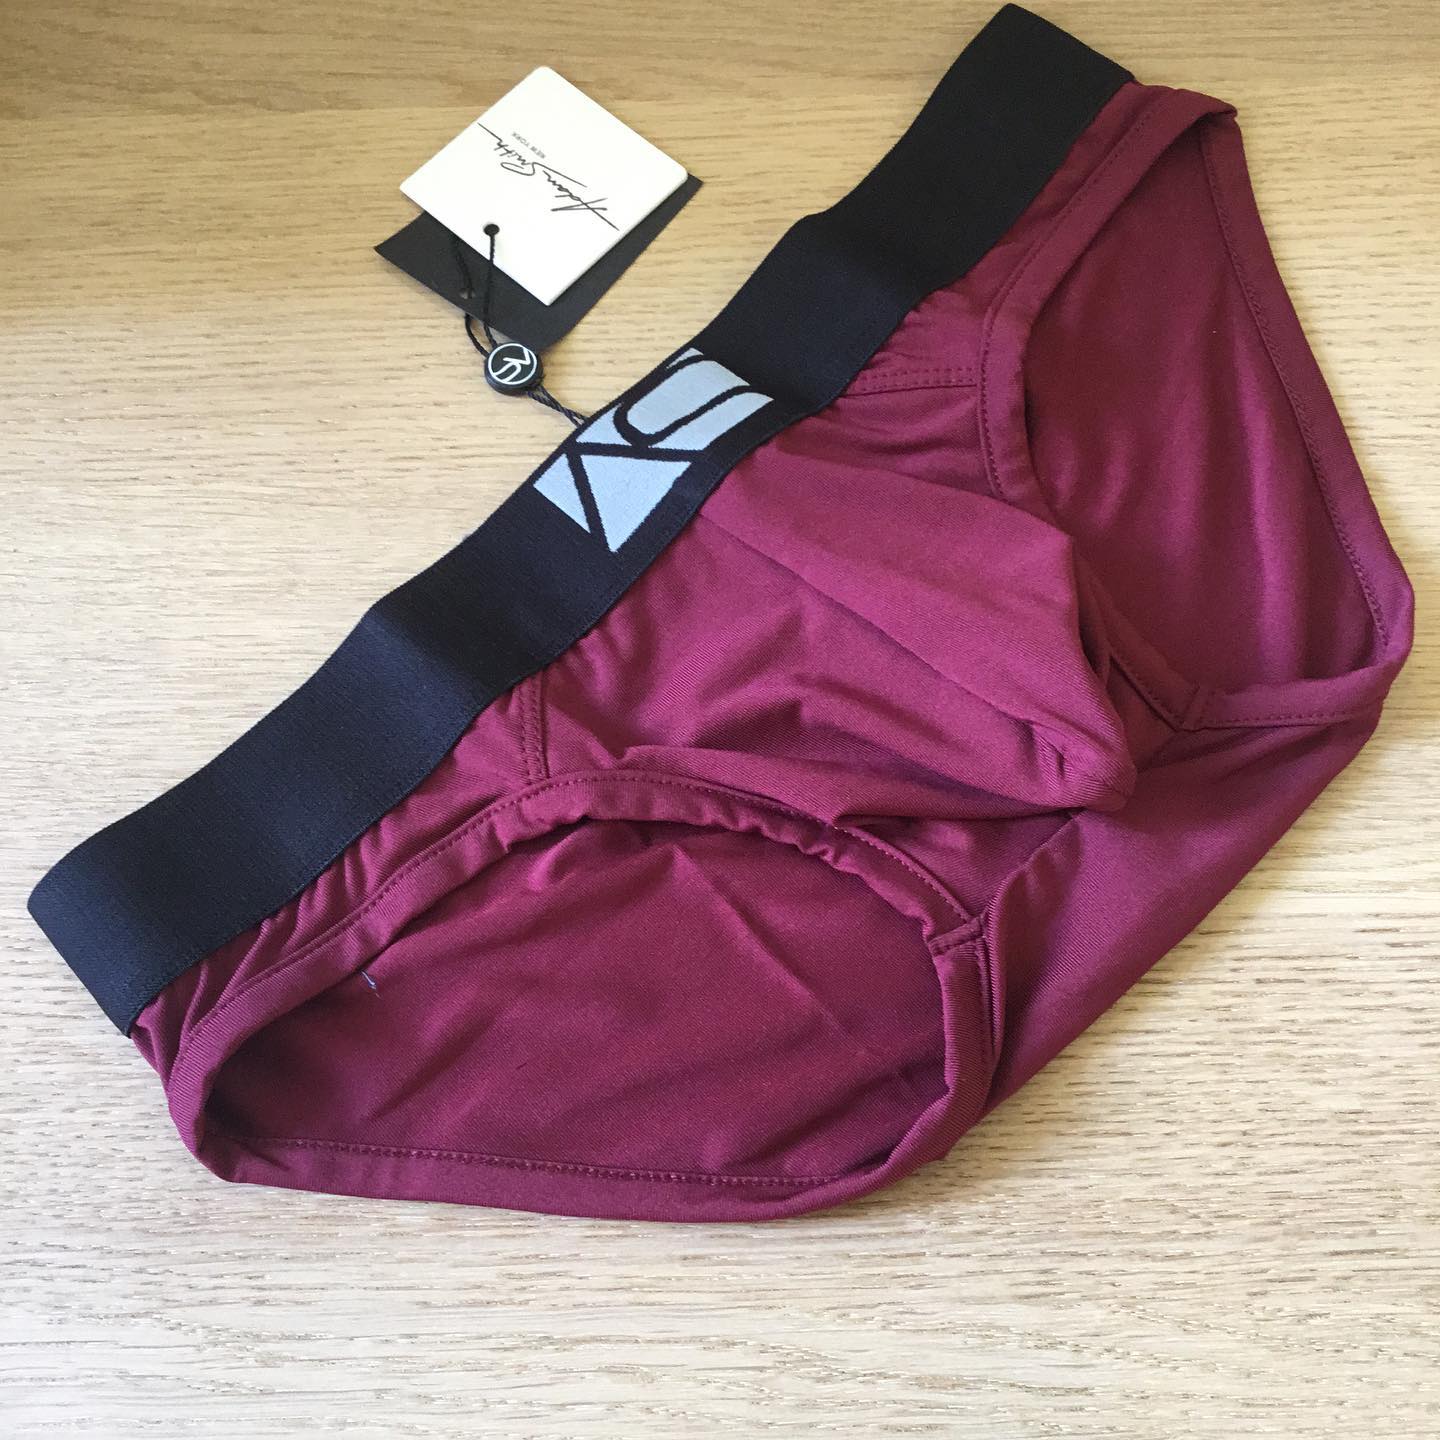 The Shaped Pouch Briefs by AdamSmithWear is a soft microfiber-made pair of burgundy red underwear in an athletic, low-rise style and contemporary silhouette. Check it out:
_____
https://menandunderwear.com/shop/underwear/adam-smith-shaped-pouch-briefs-burgundy